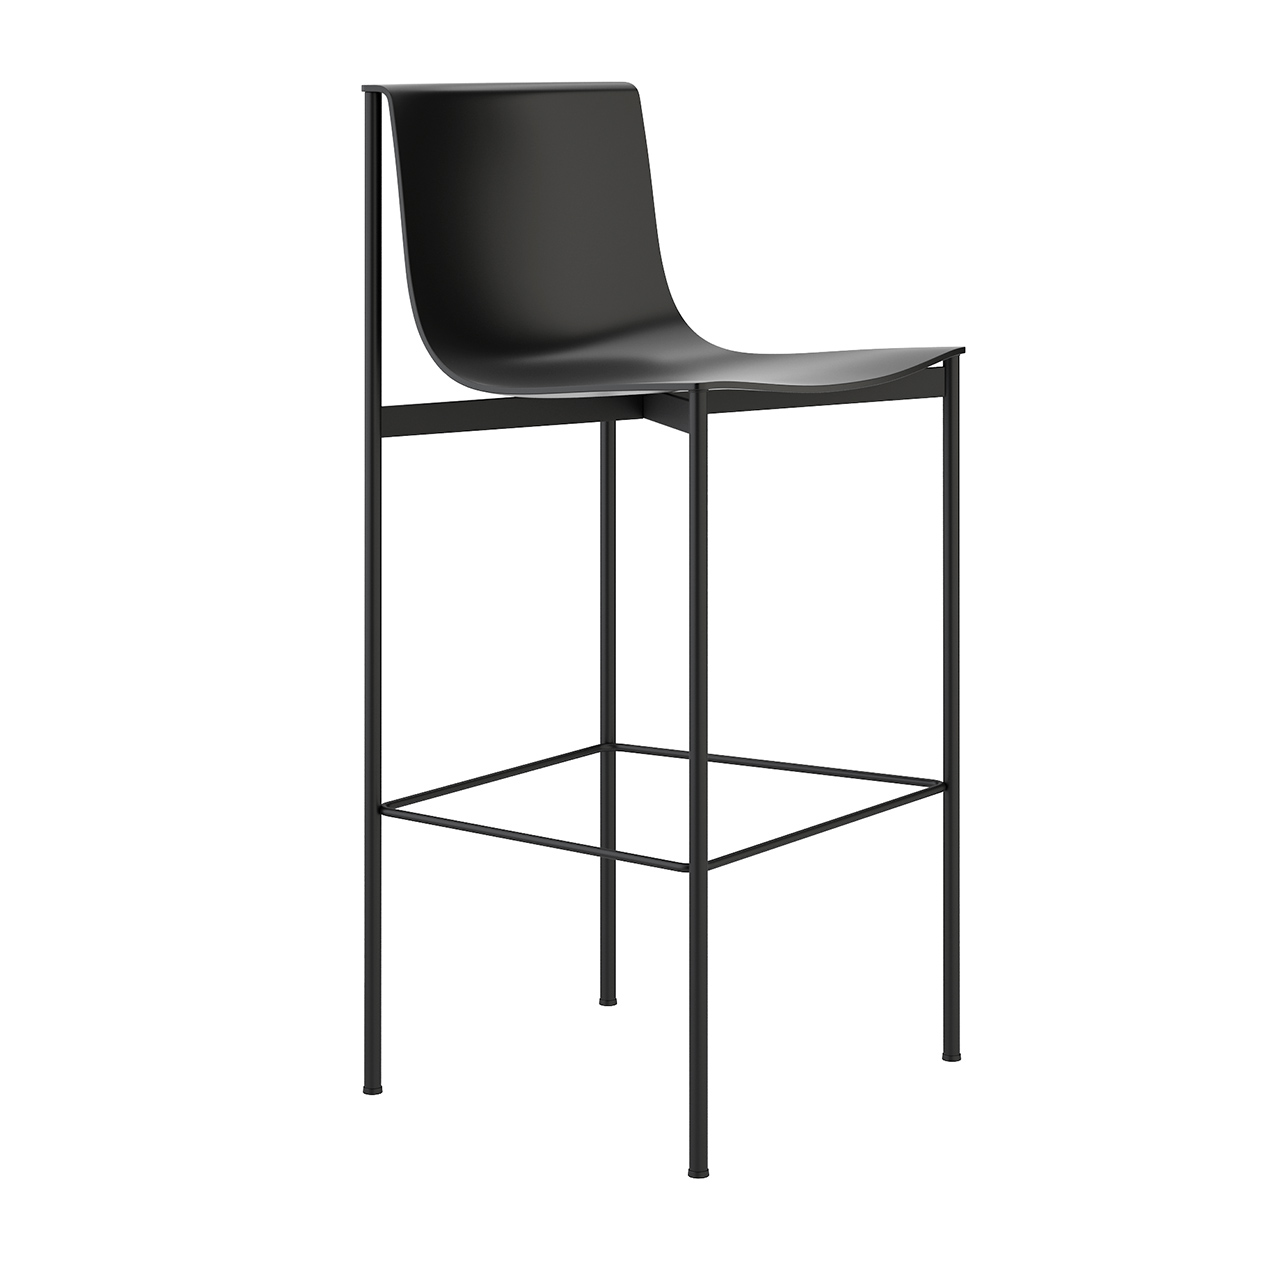 Ombra Bar Stool 81 by Lema